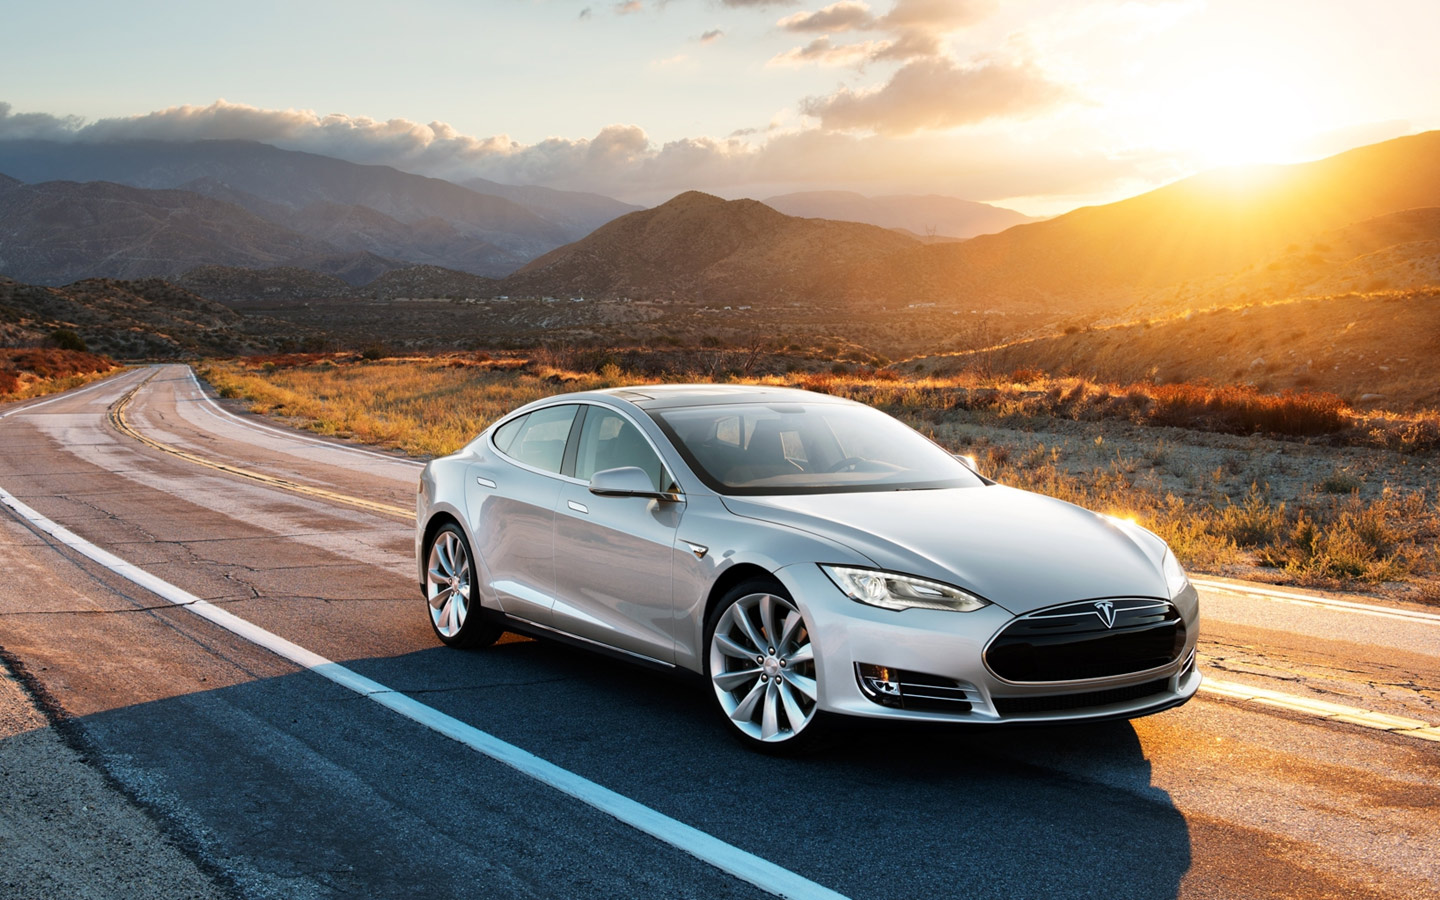 tesla model s comes with remarkable performance specs and advance features